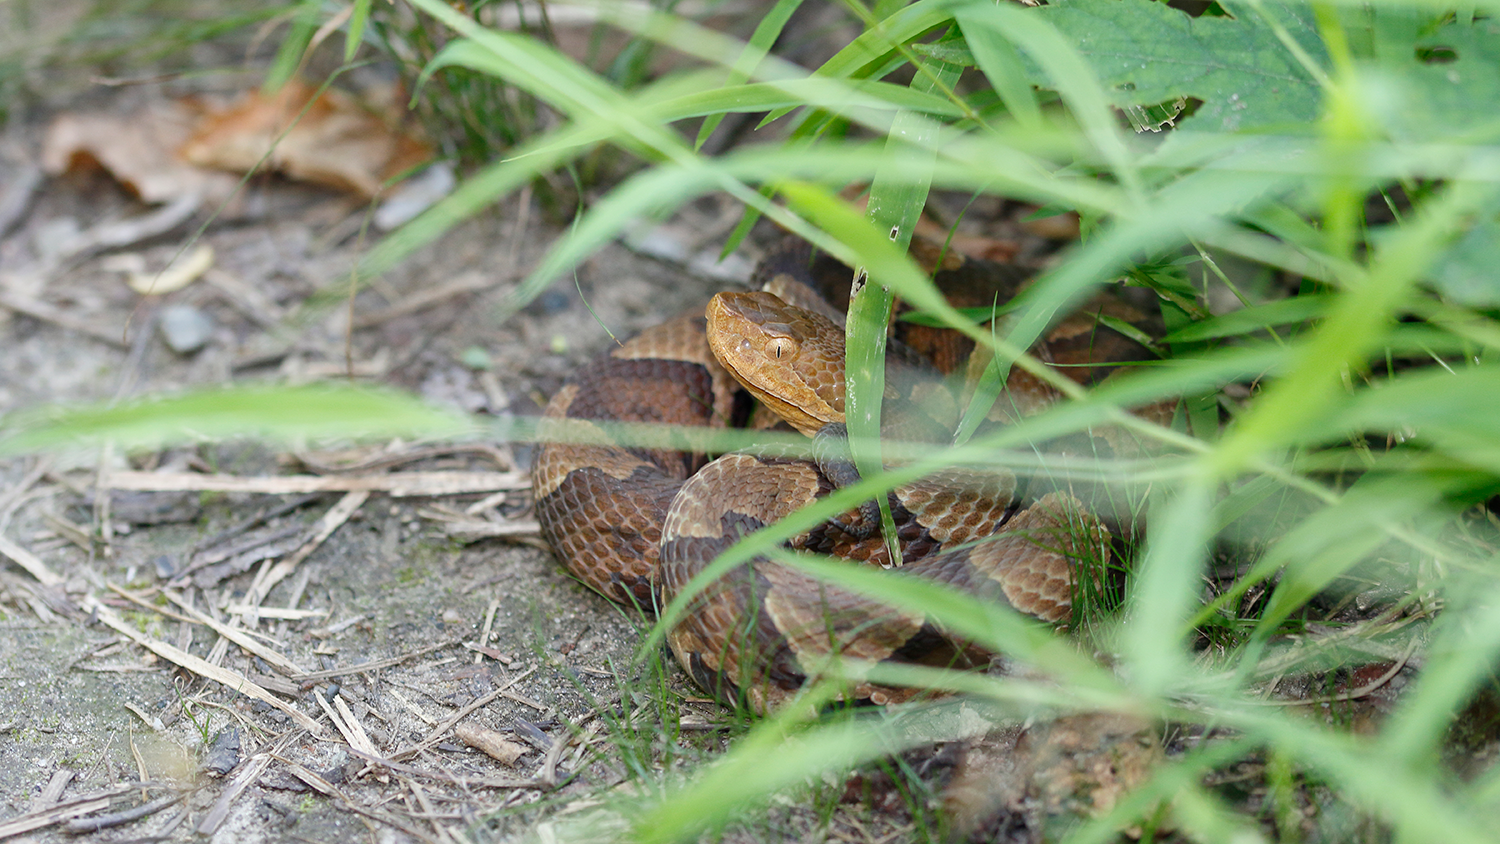 Snake sitting on the side of a hiking trail - Snake Season: 7 Facts That Will Keep You Safe - College of Natural Resources at NC State University